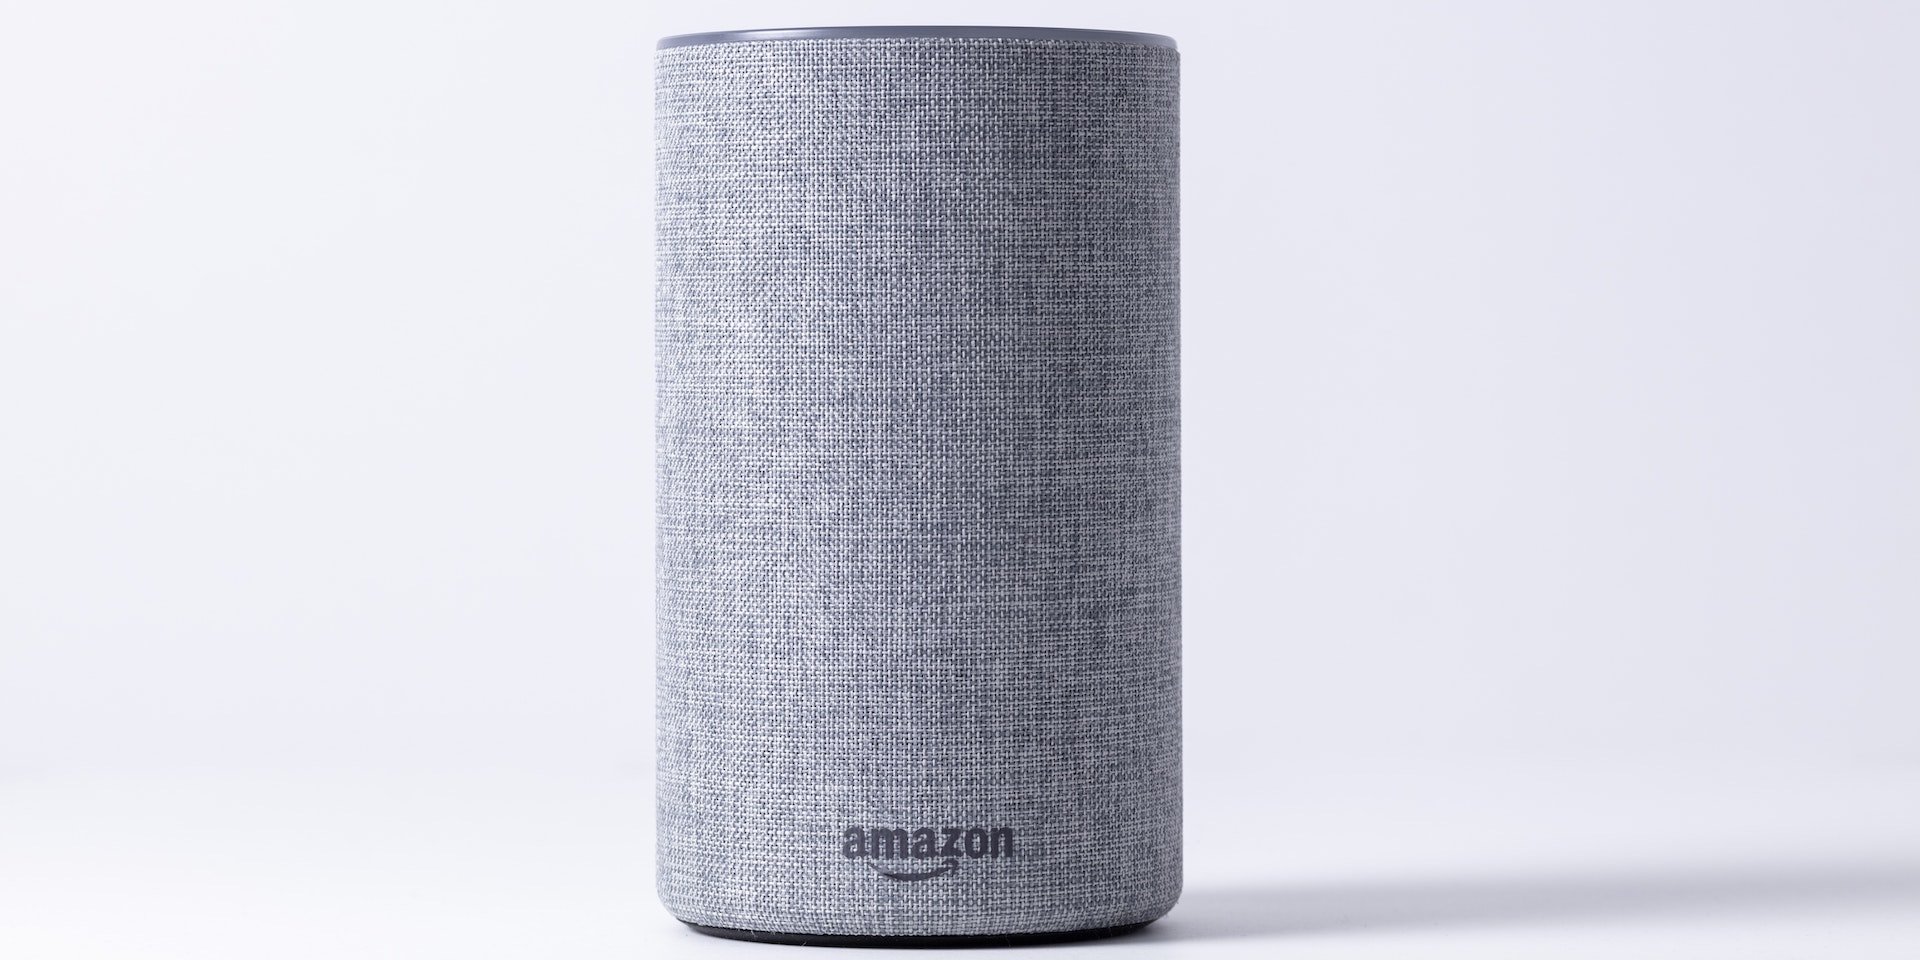 Amazon may lose $10 billion this year due to Alexa voice assistant